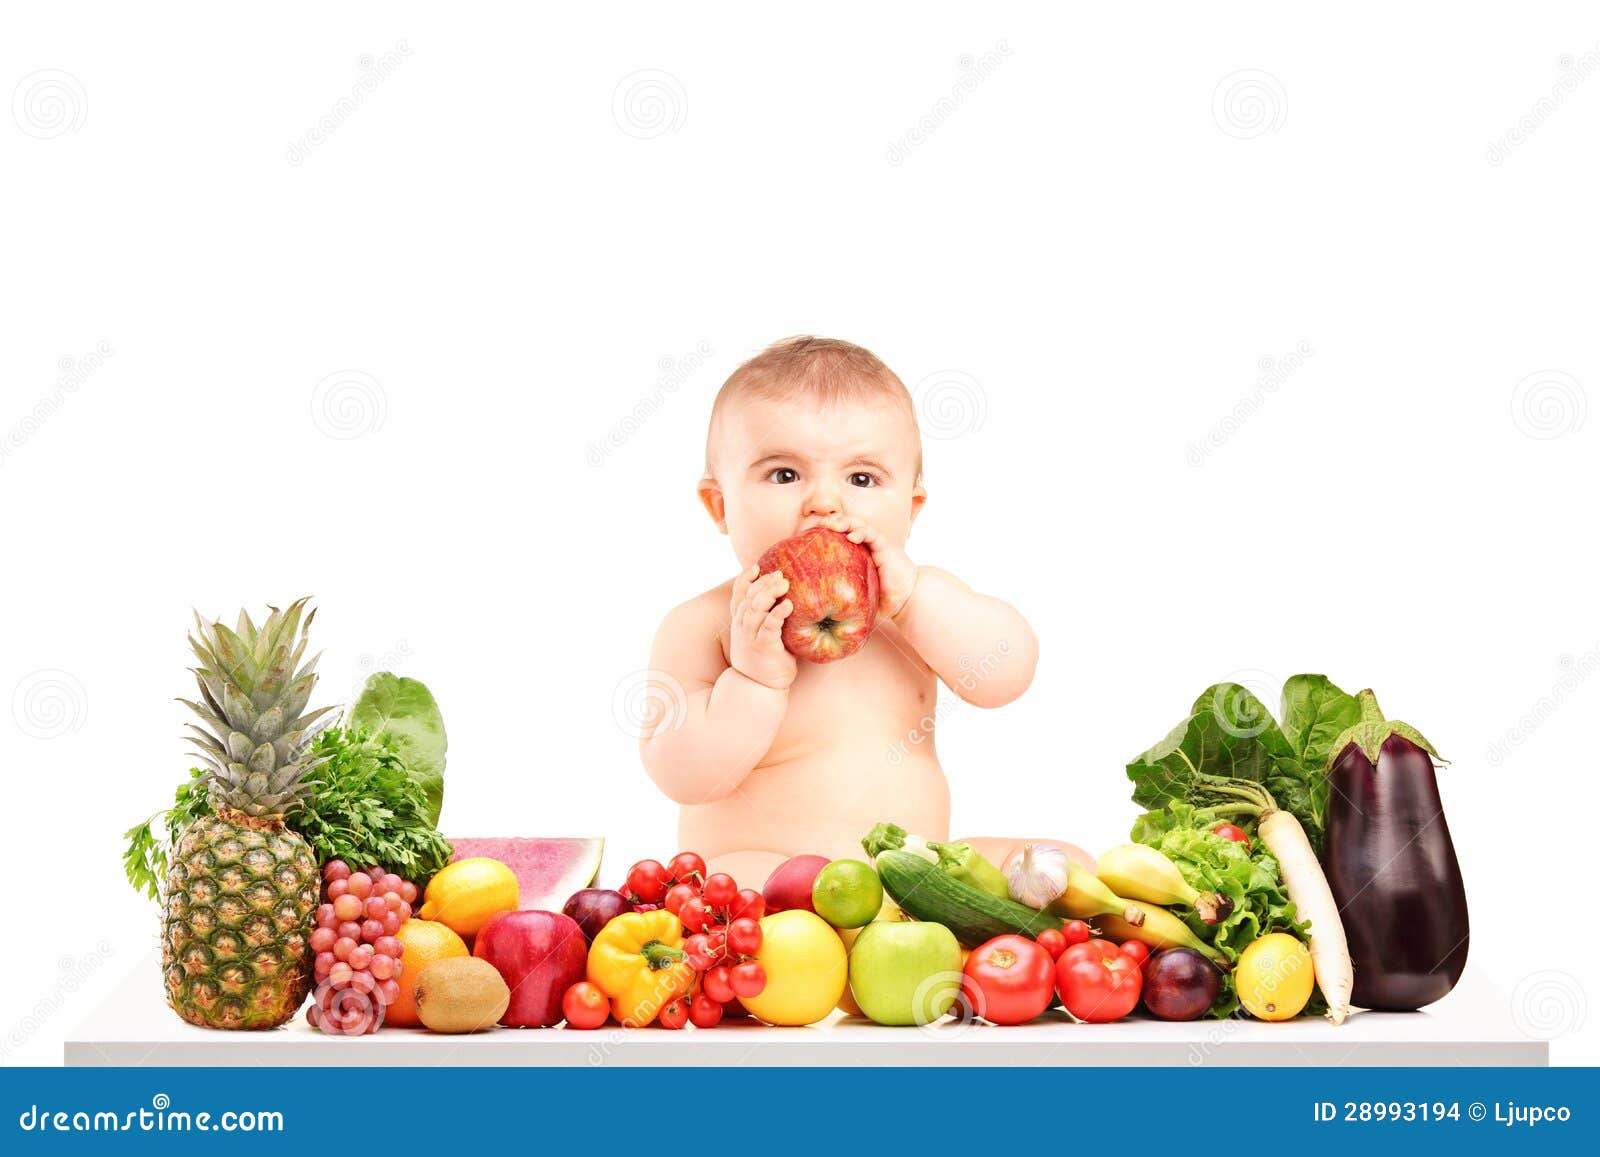 Cute Baby Boy Sitting On A Table With Fruits And ...